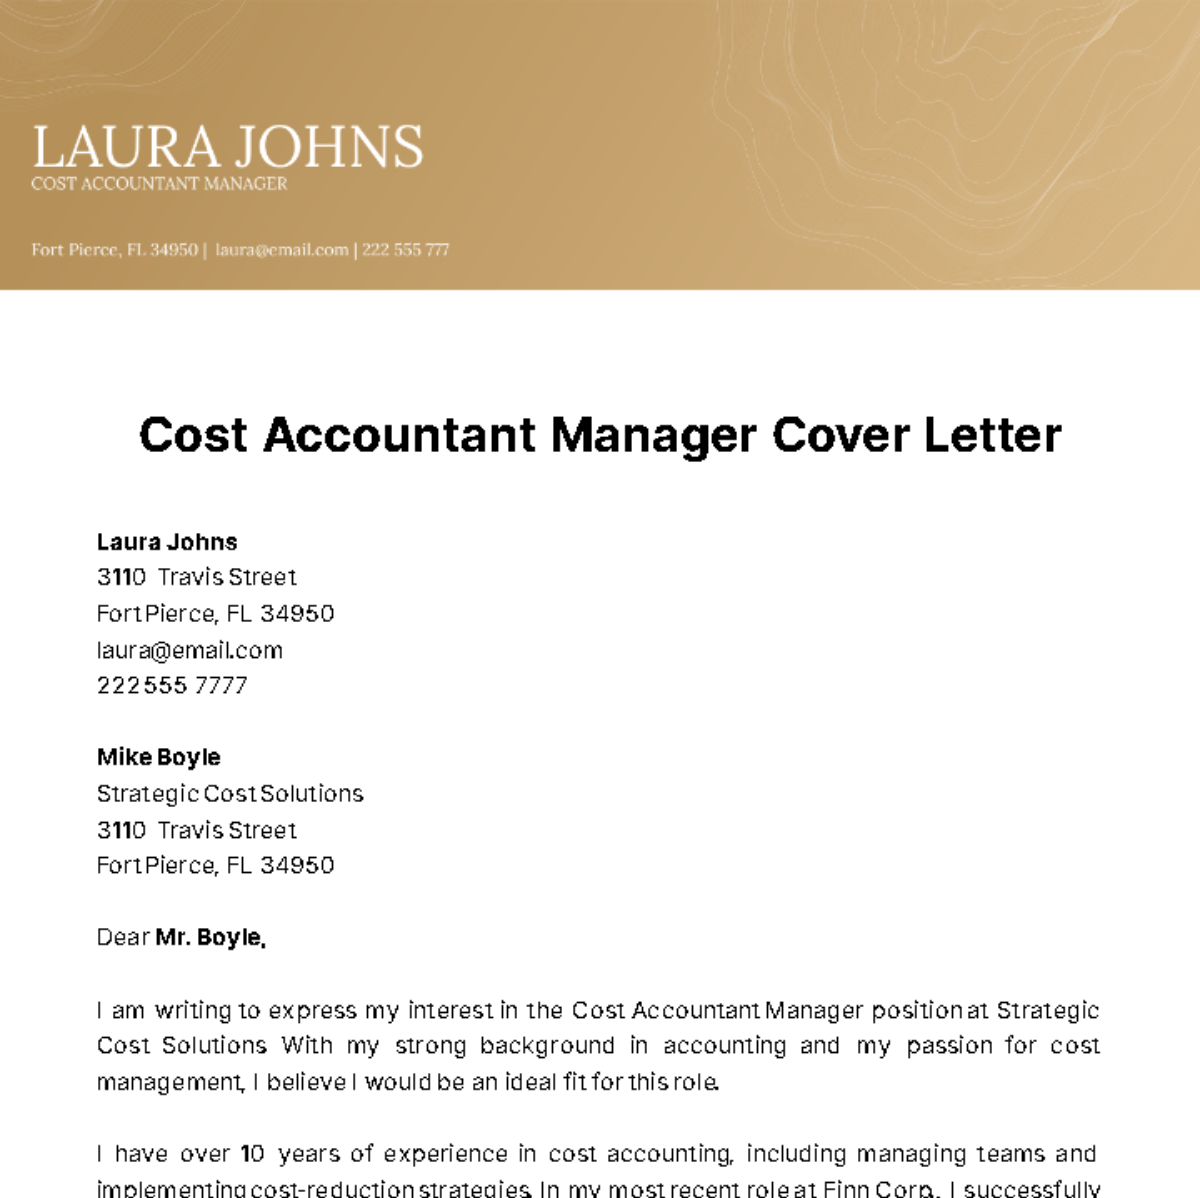 Cost Accountant Manager Cover Letter Template